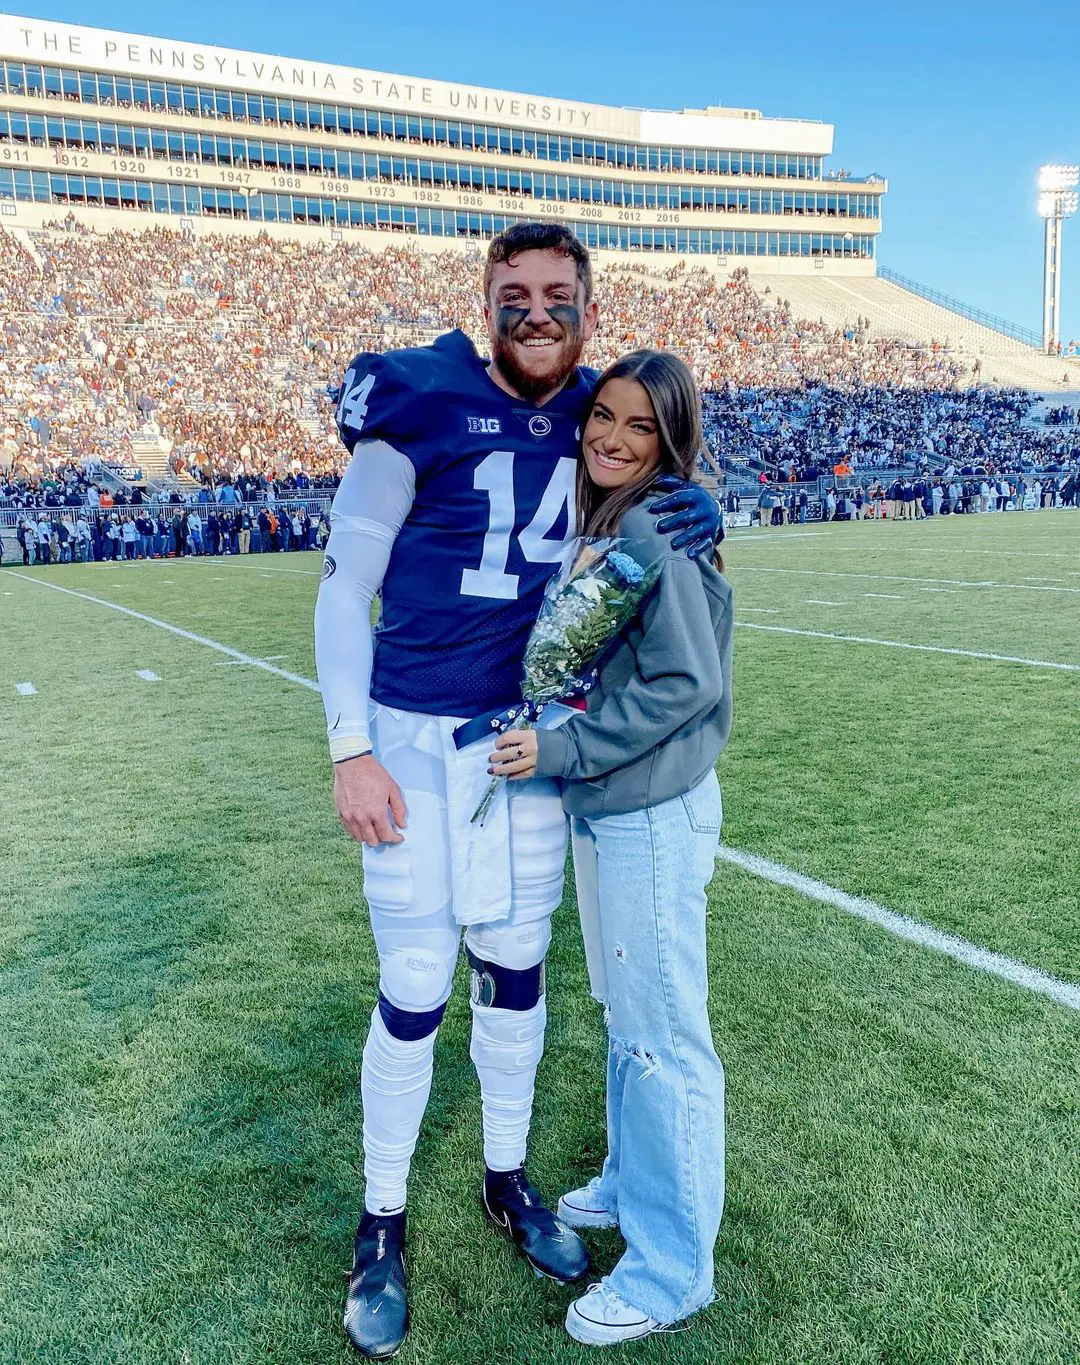 Sean with her partner Juliana hugging each other after the game at Beaver Stadium, State College, PA in November 2022